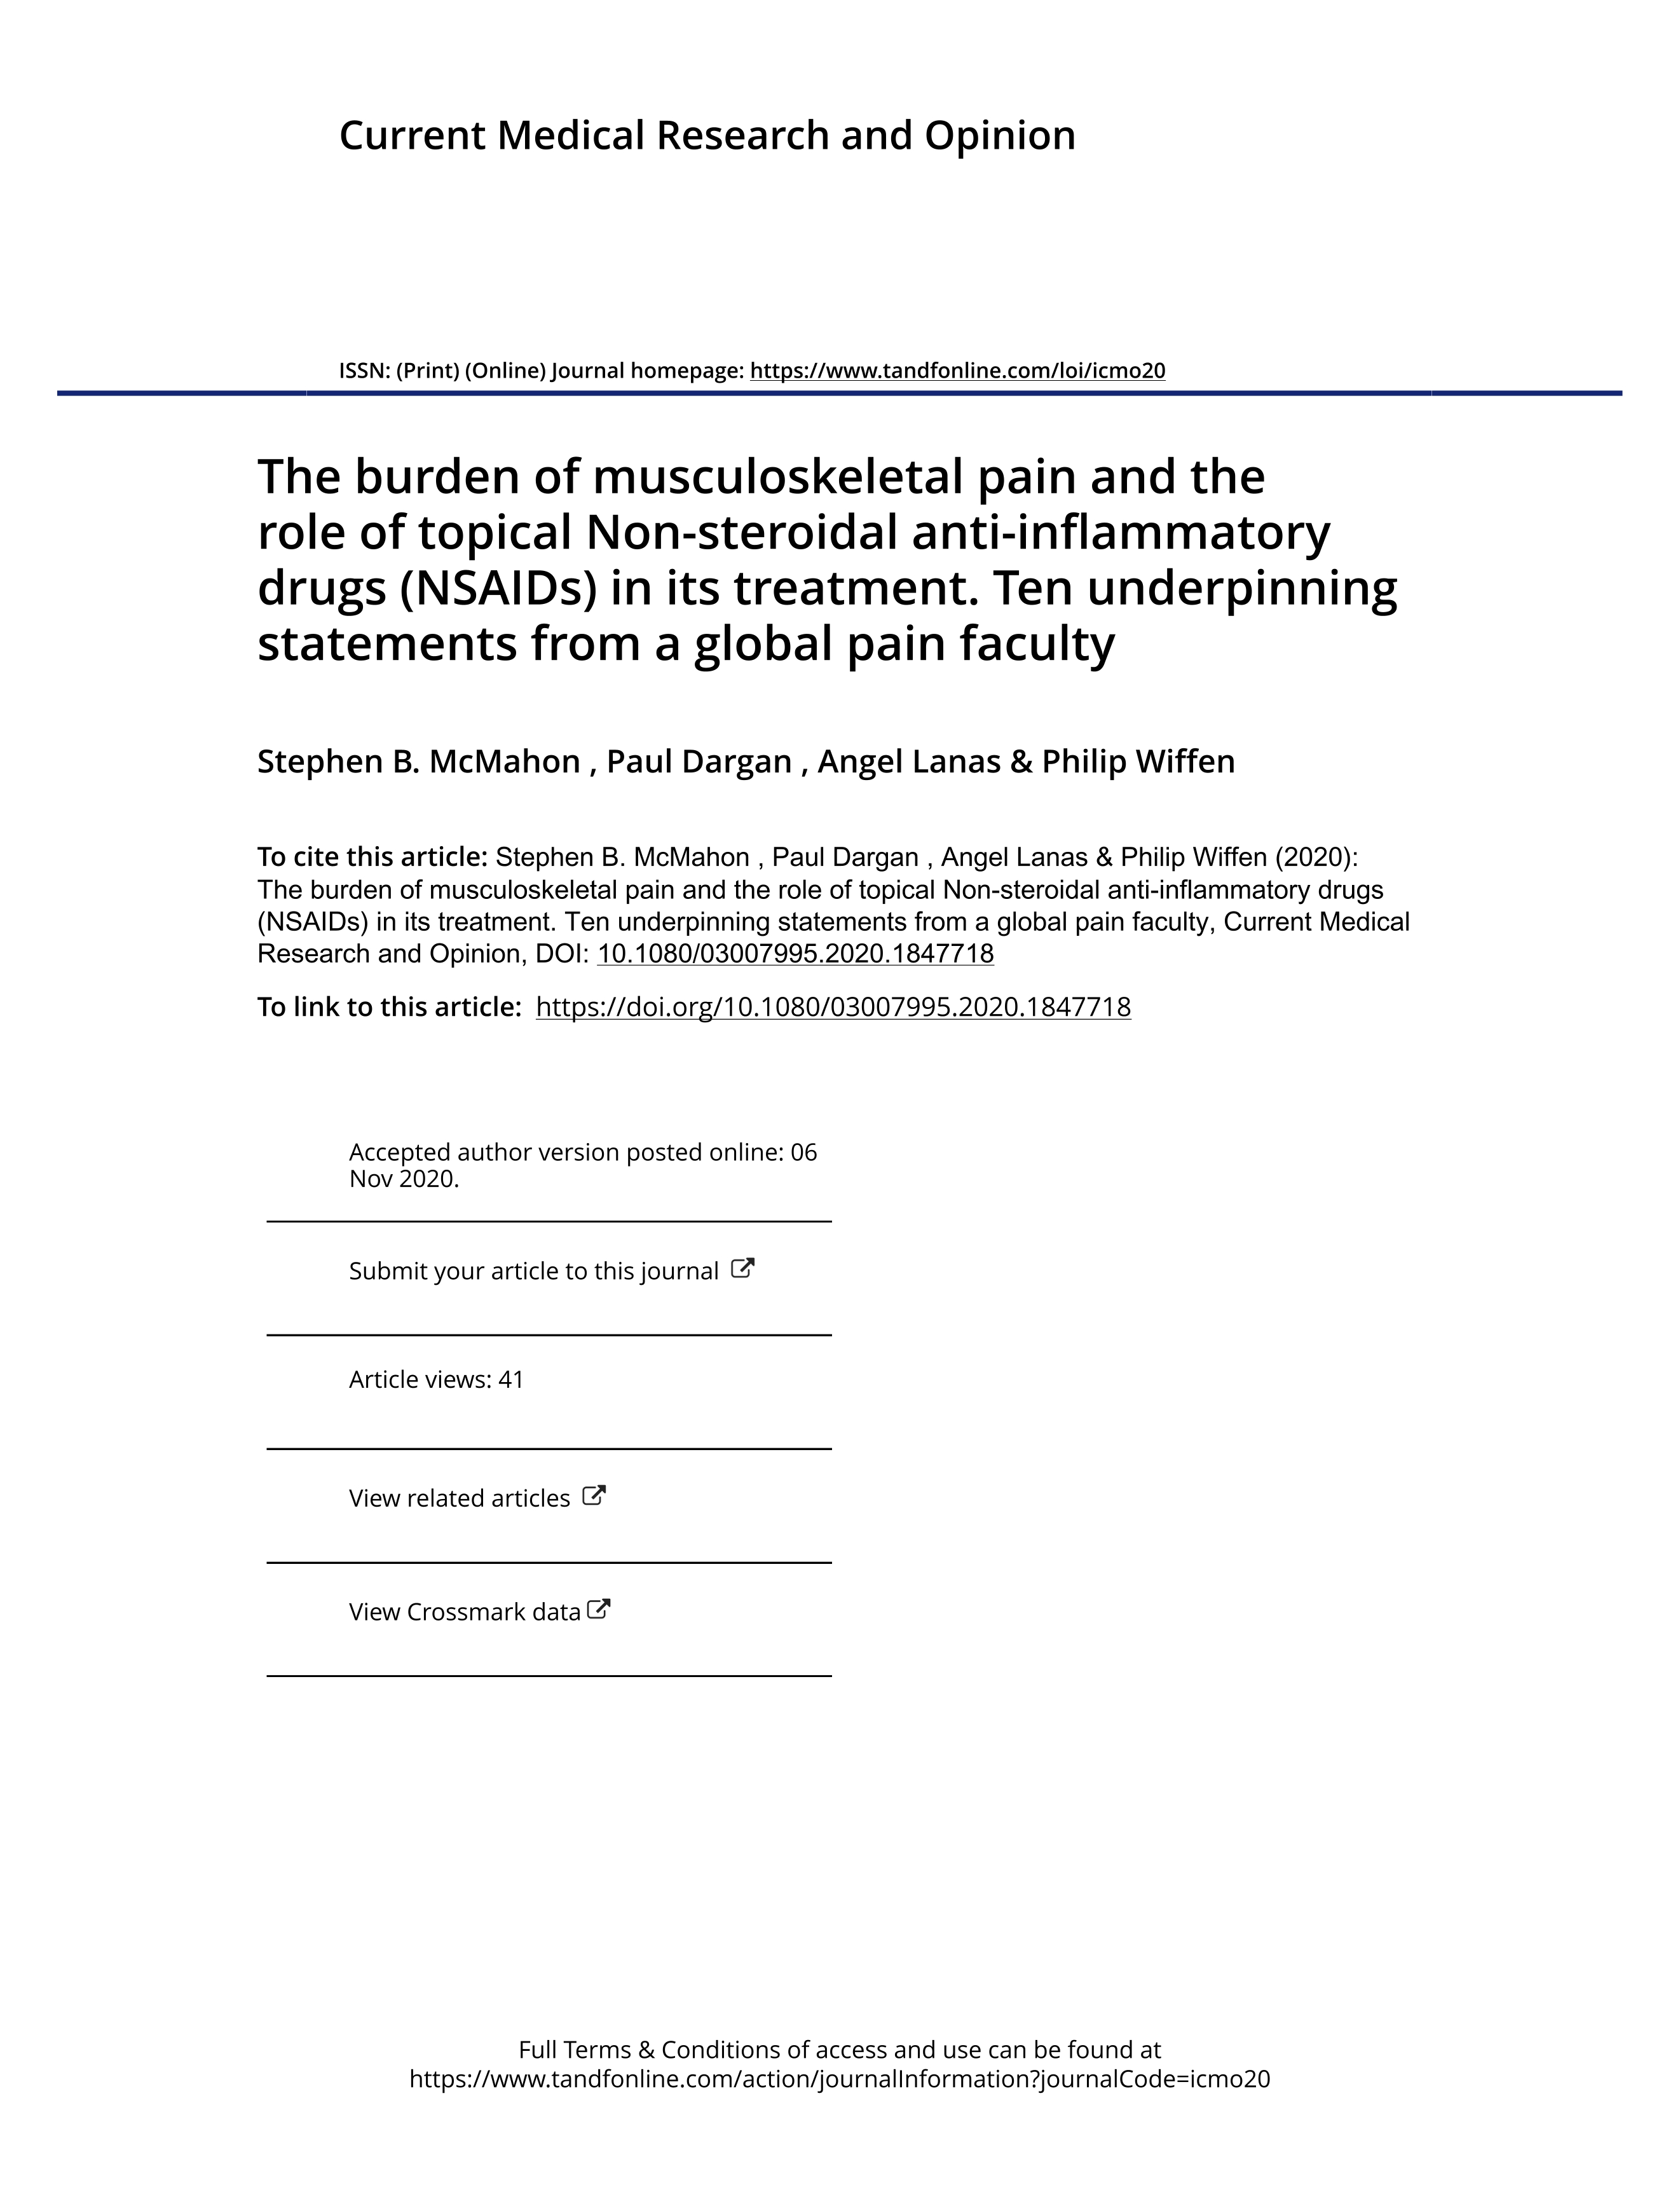 The burden of musculoskeletal pain and the role of topical non-steroidal anti-inflammatory drugs (NSAIDs) in its treatment. Ten underpinning statements from a global pain faculty